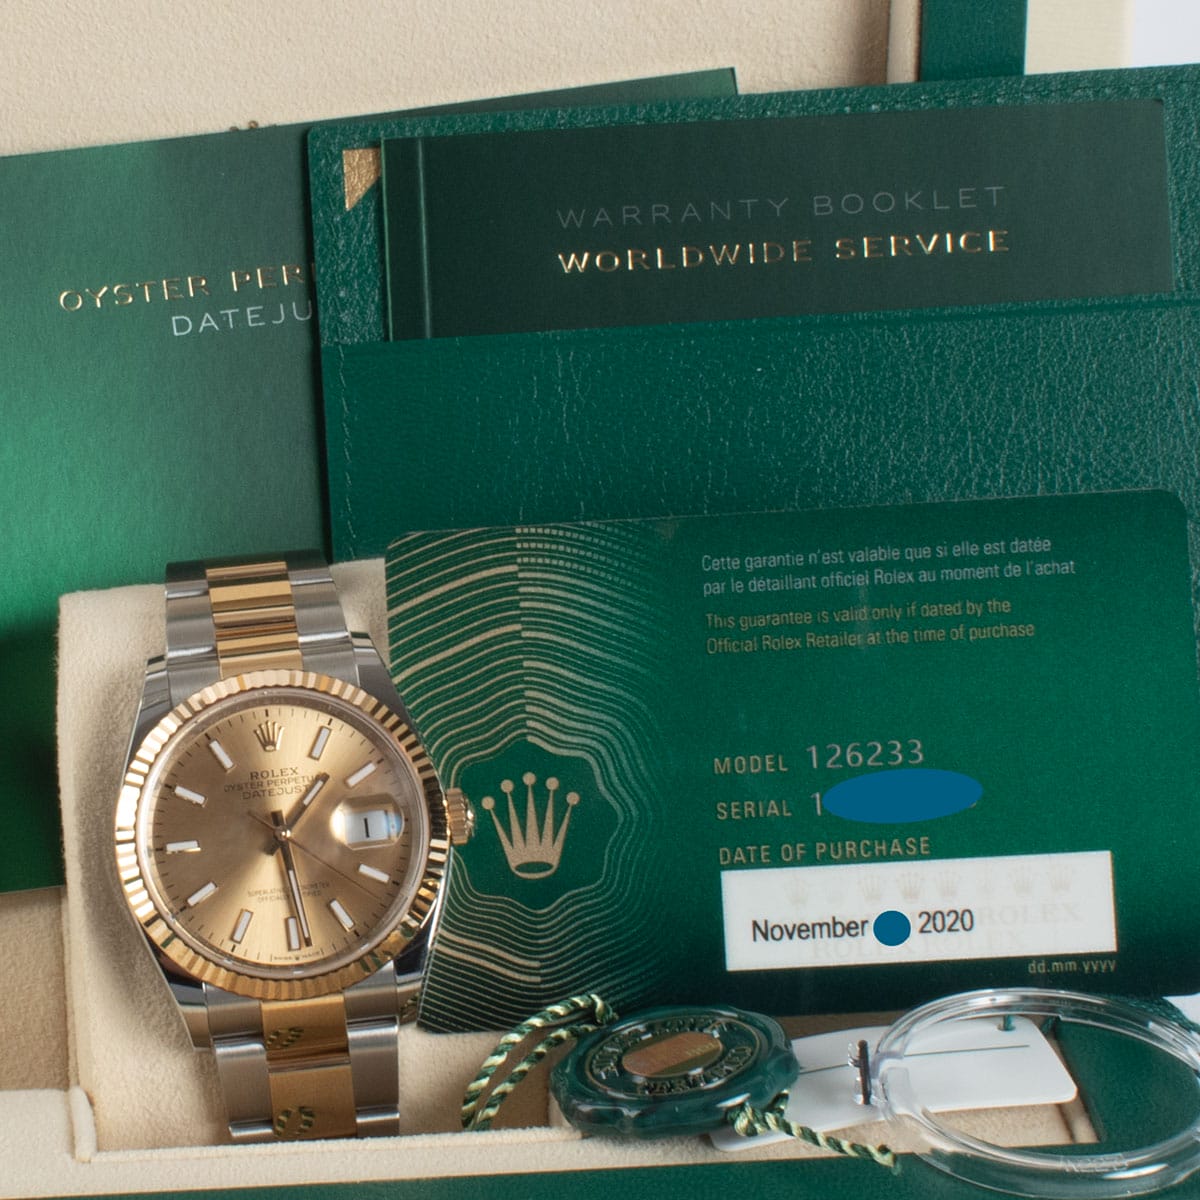 View in Box of Datejust 36